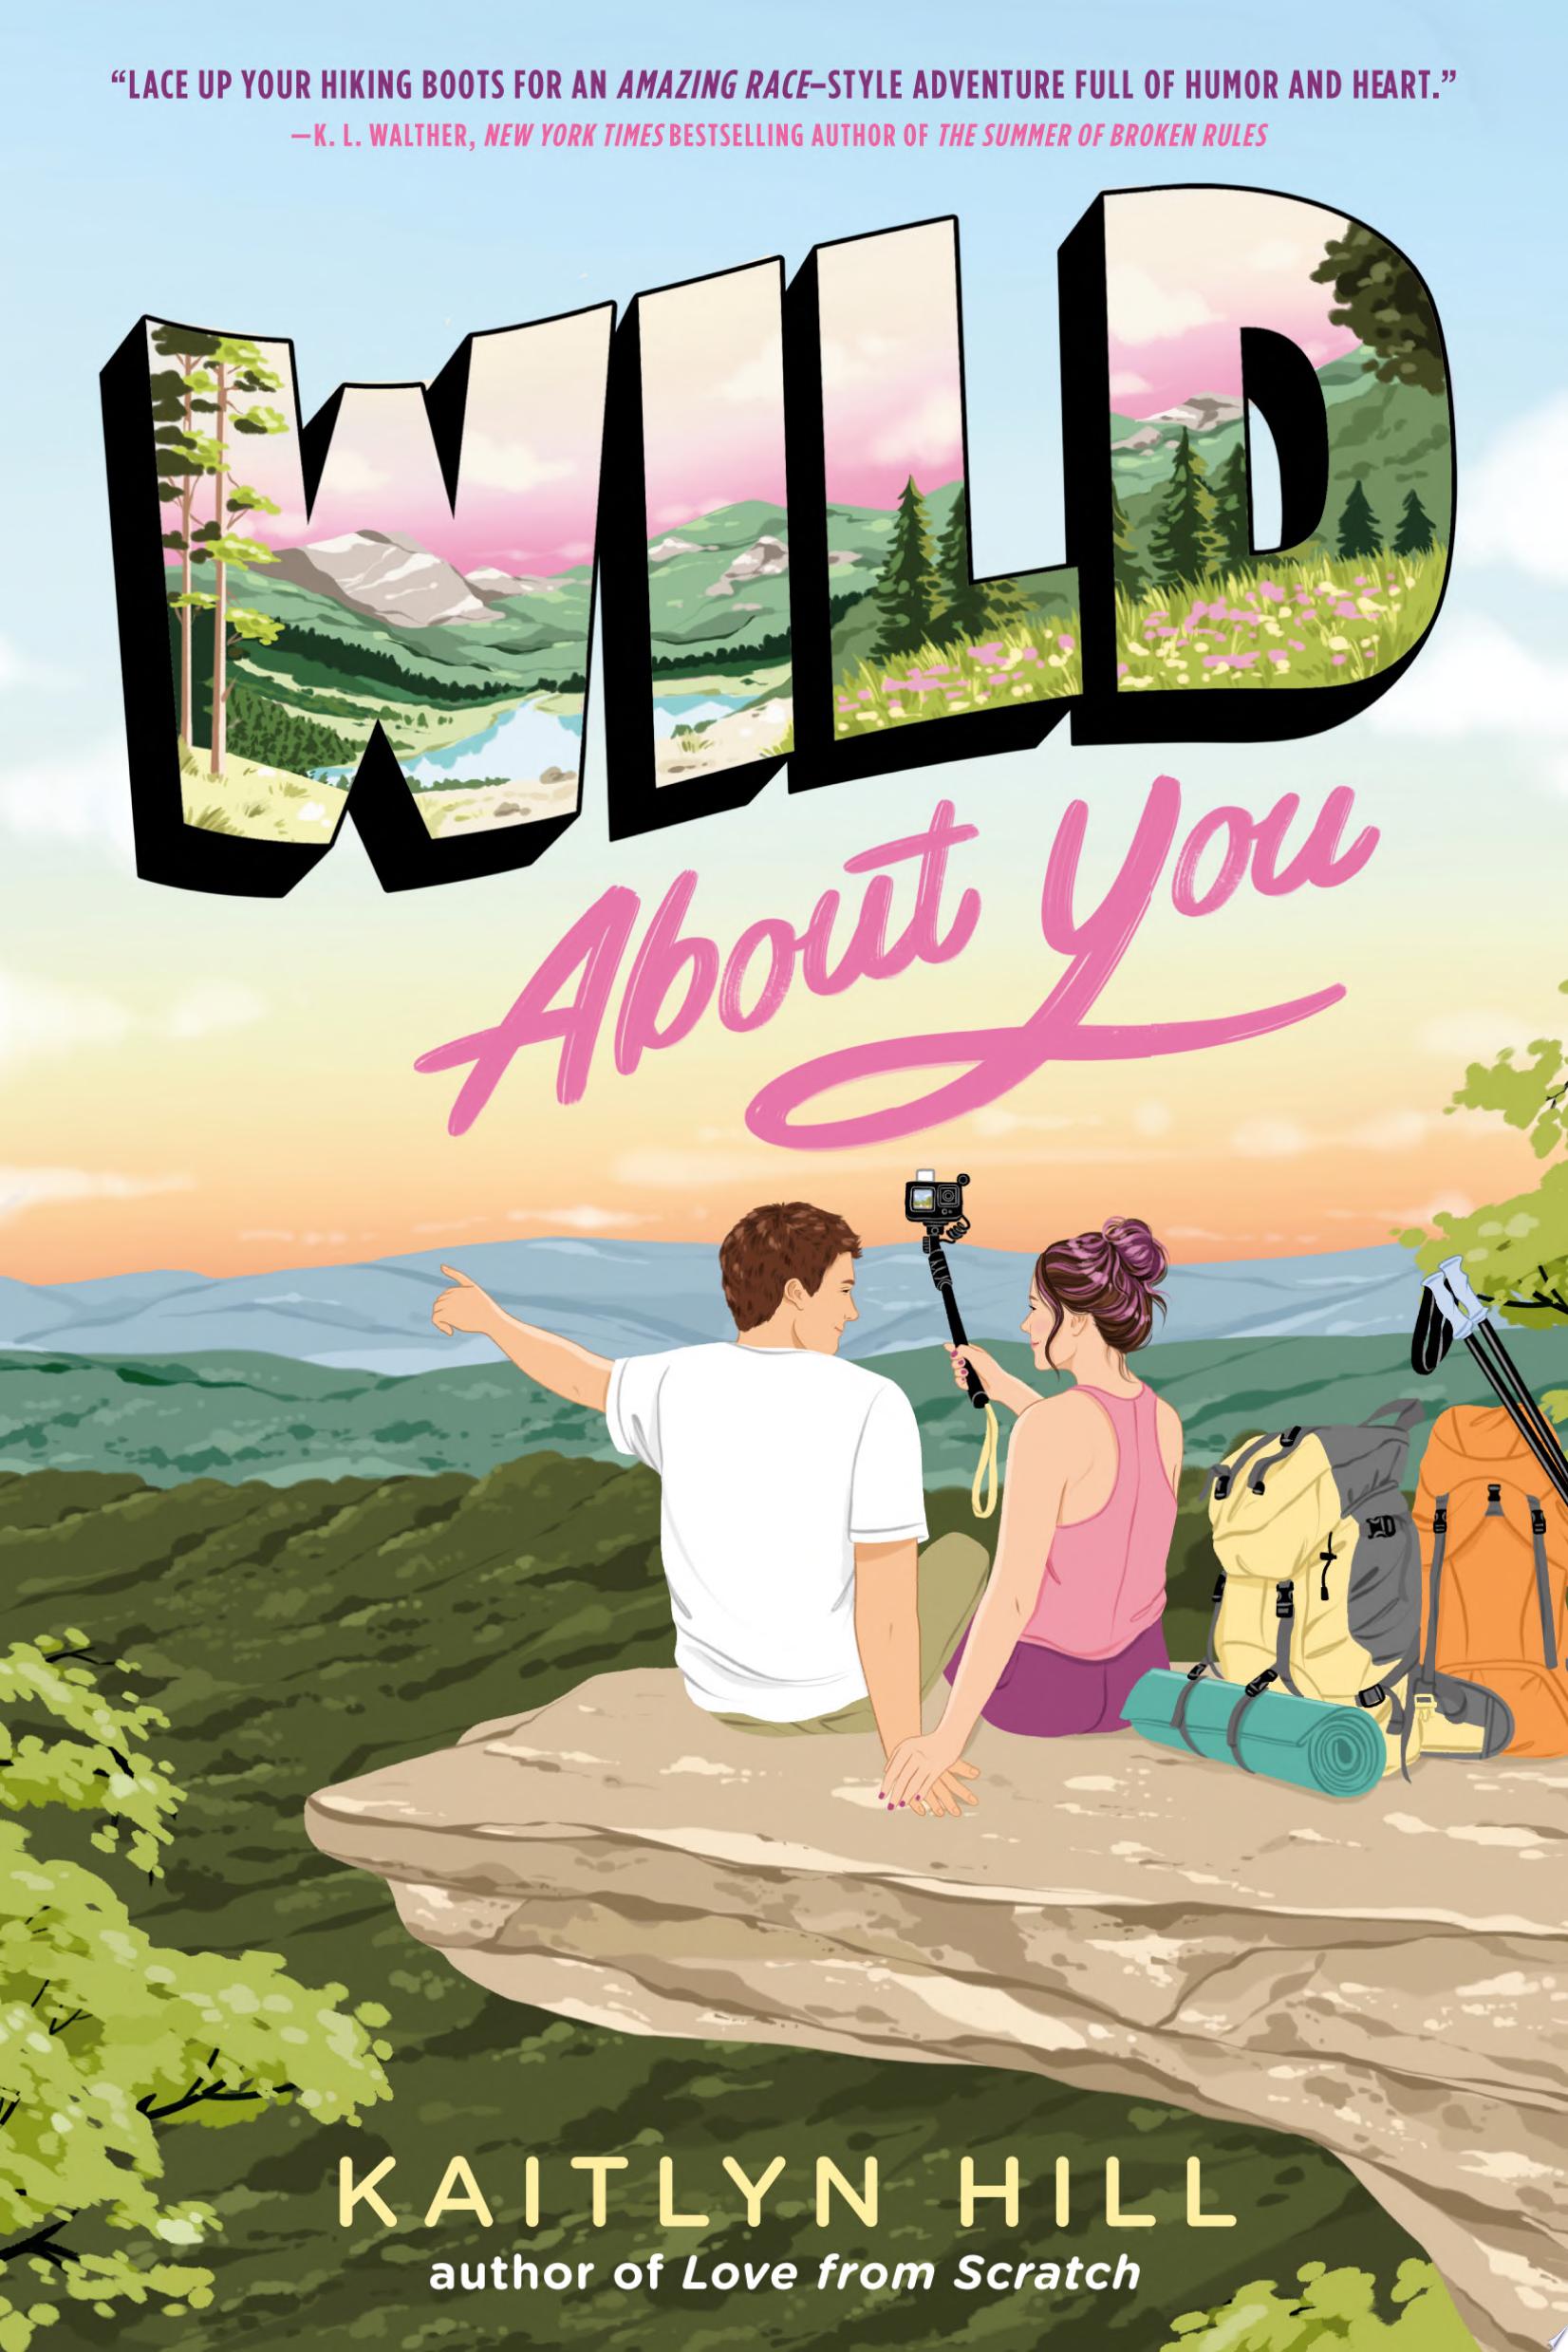 Image for "Wild About You"